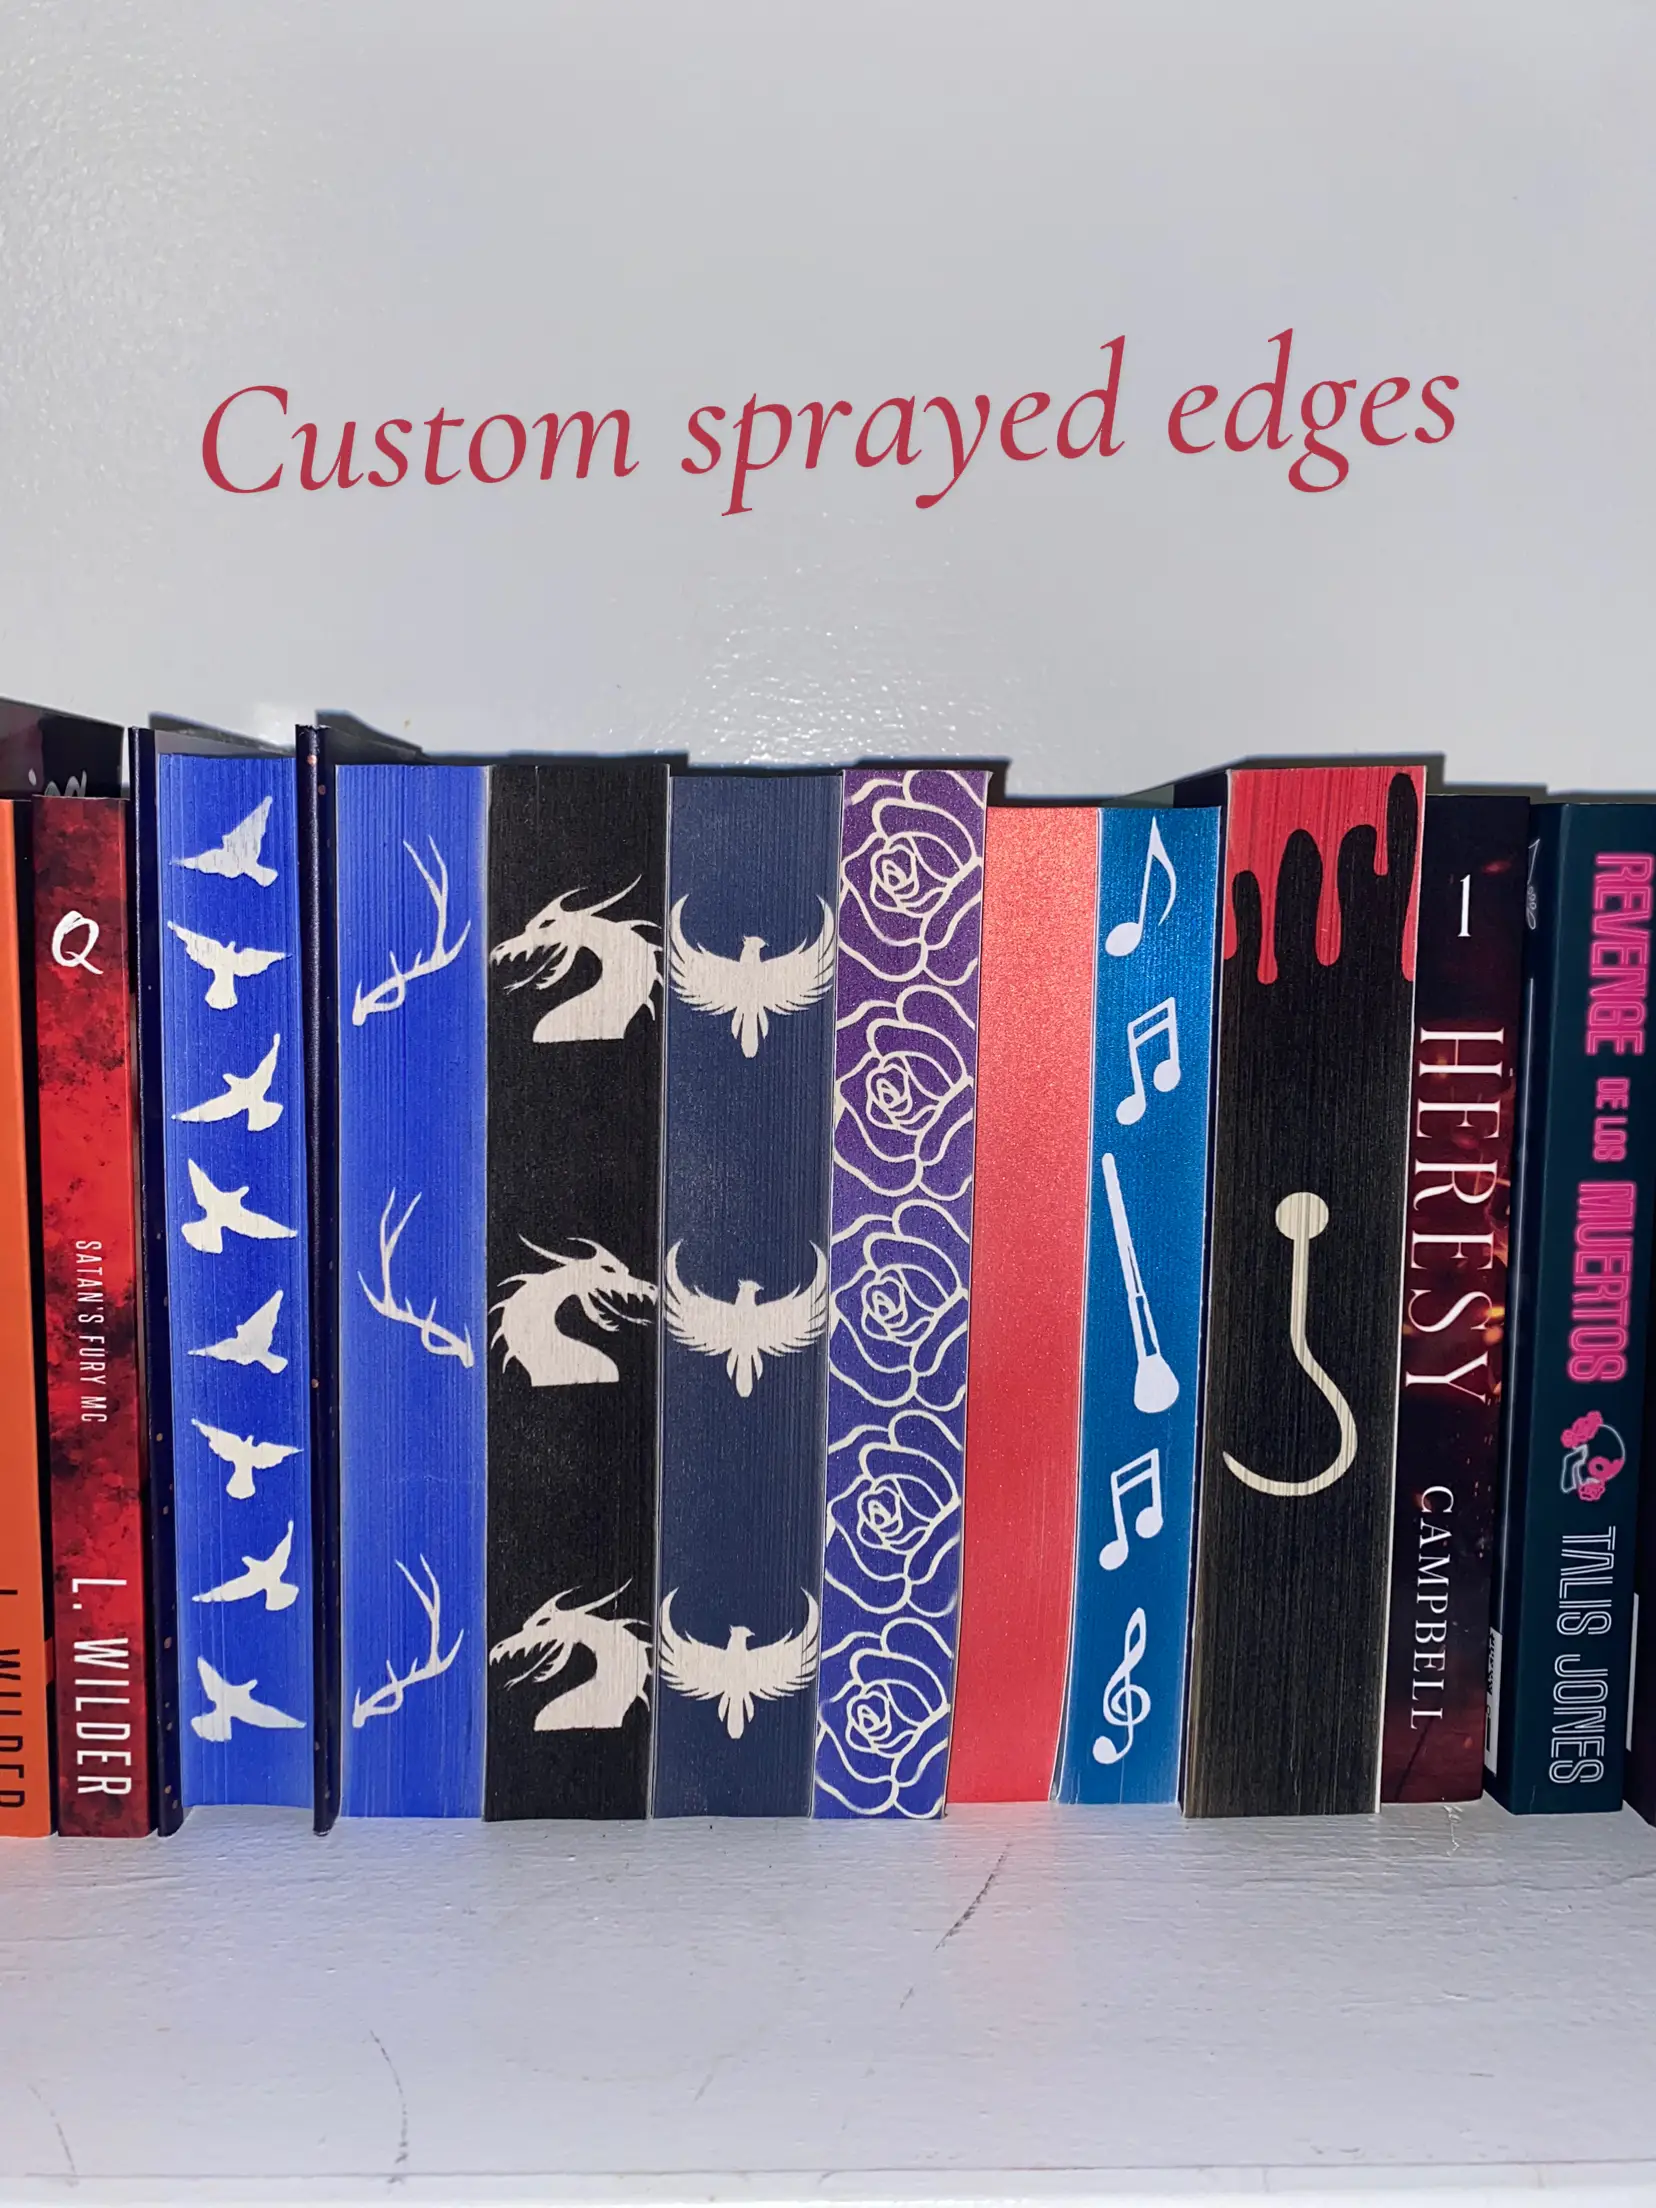 Custom sprayed edges on books, Gallery posted by The End